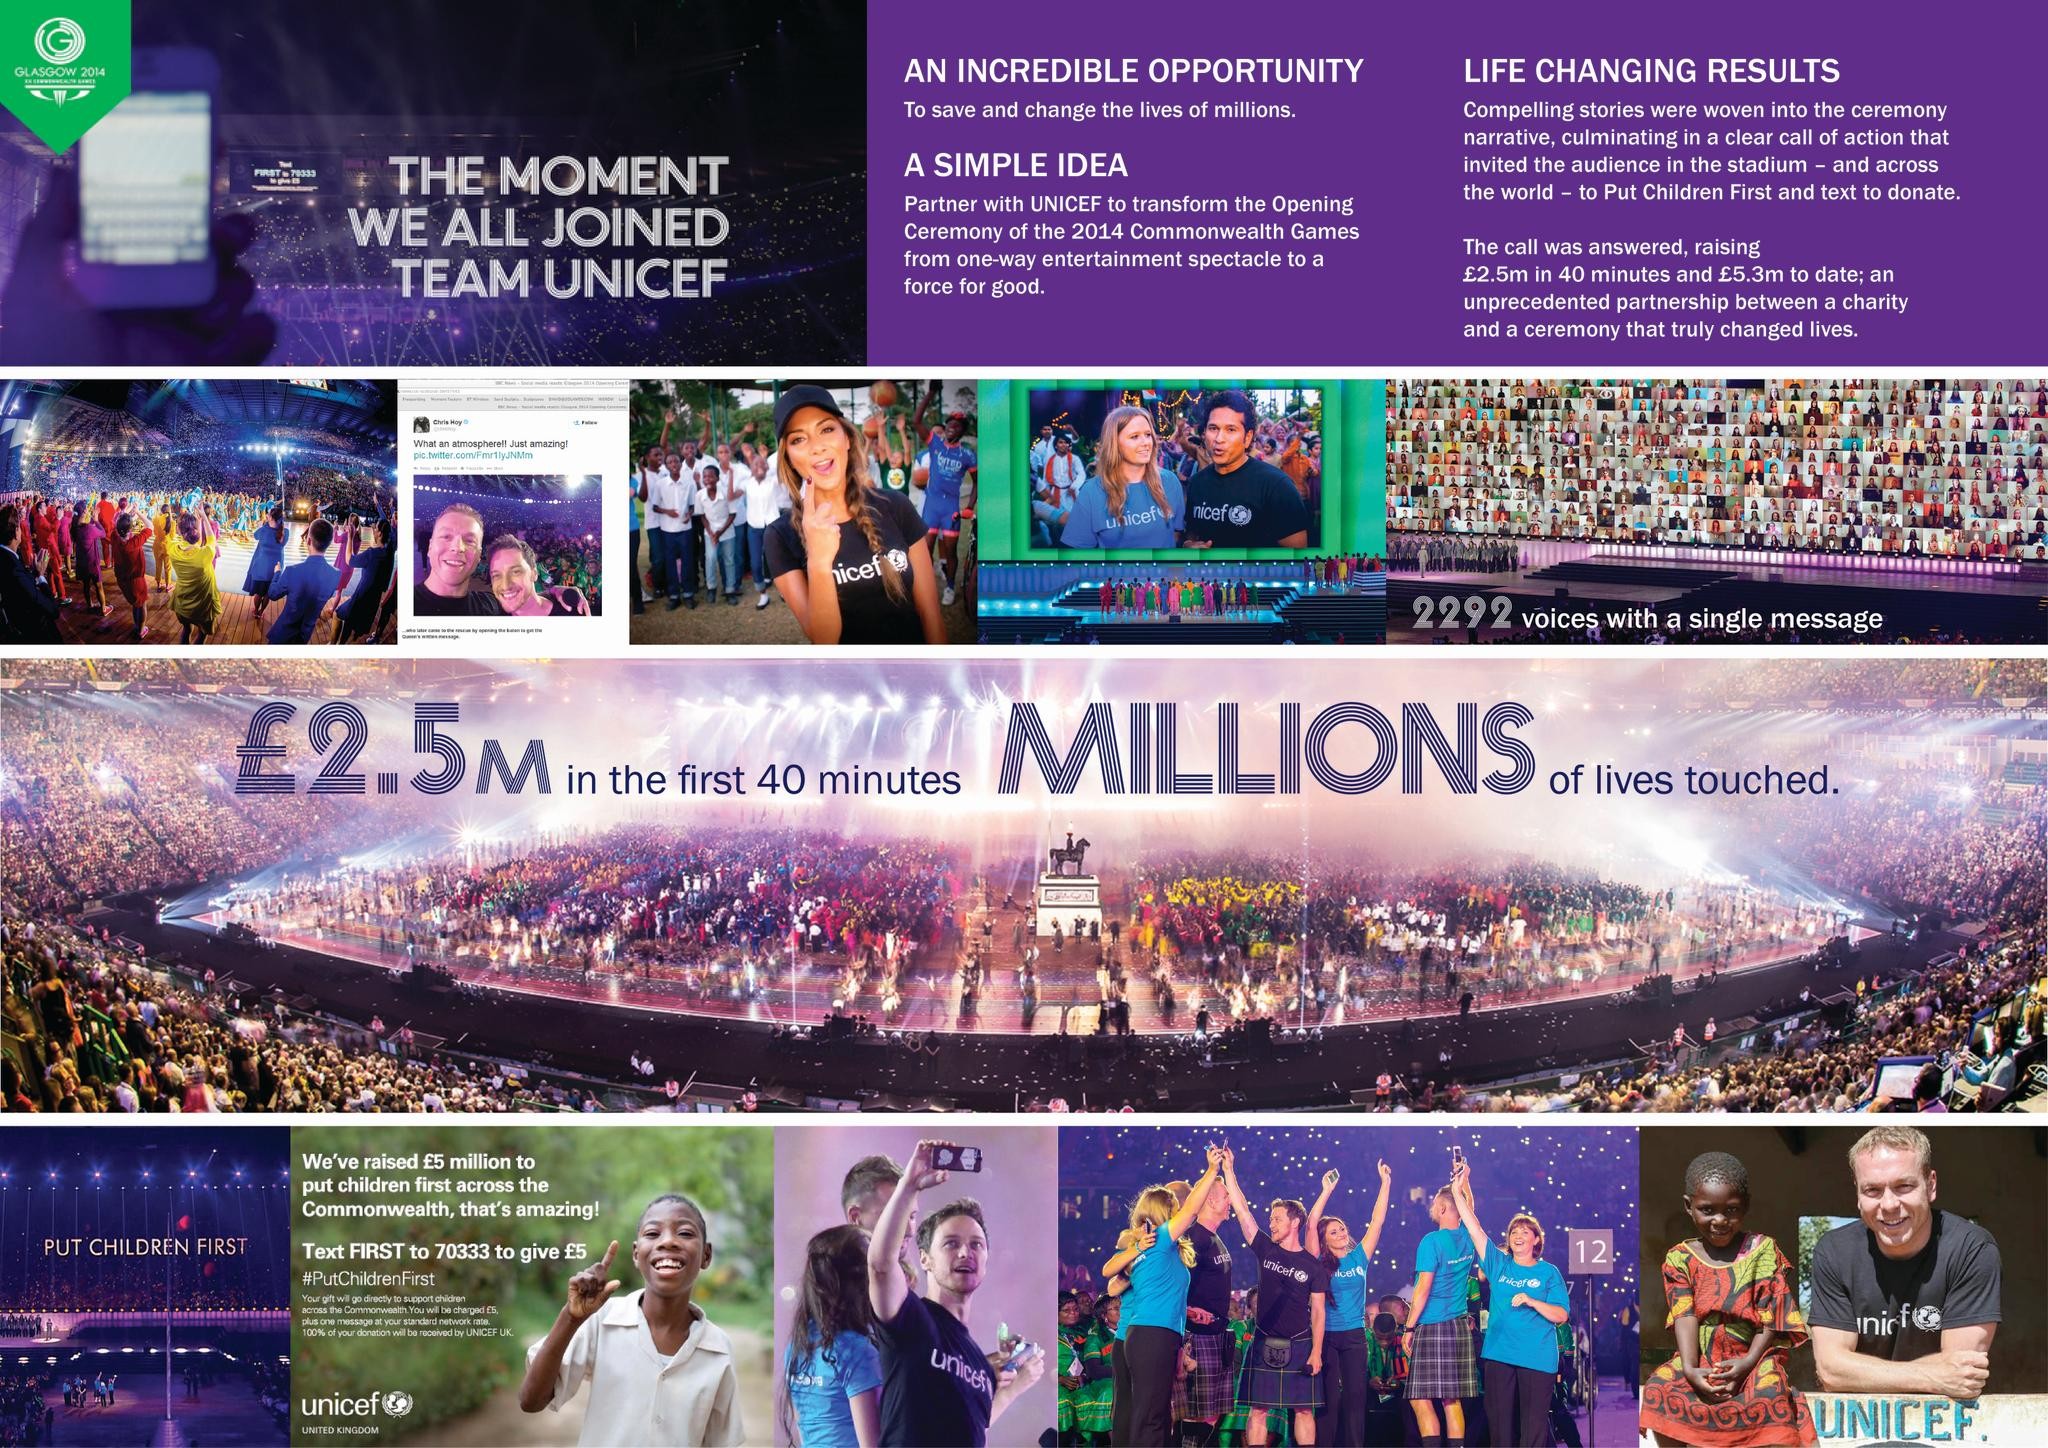 UNICEF AT THE GLASGOW COMMONWEALTH GAMES